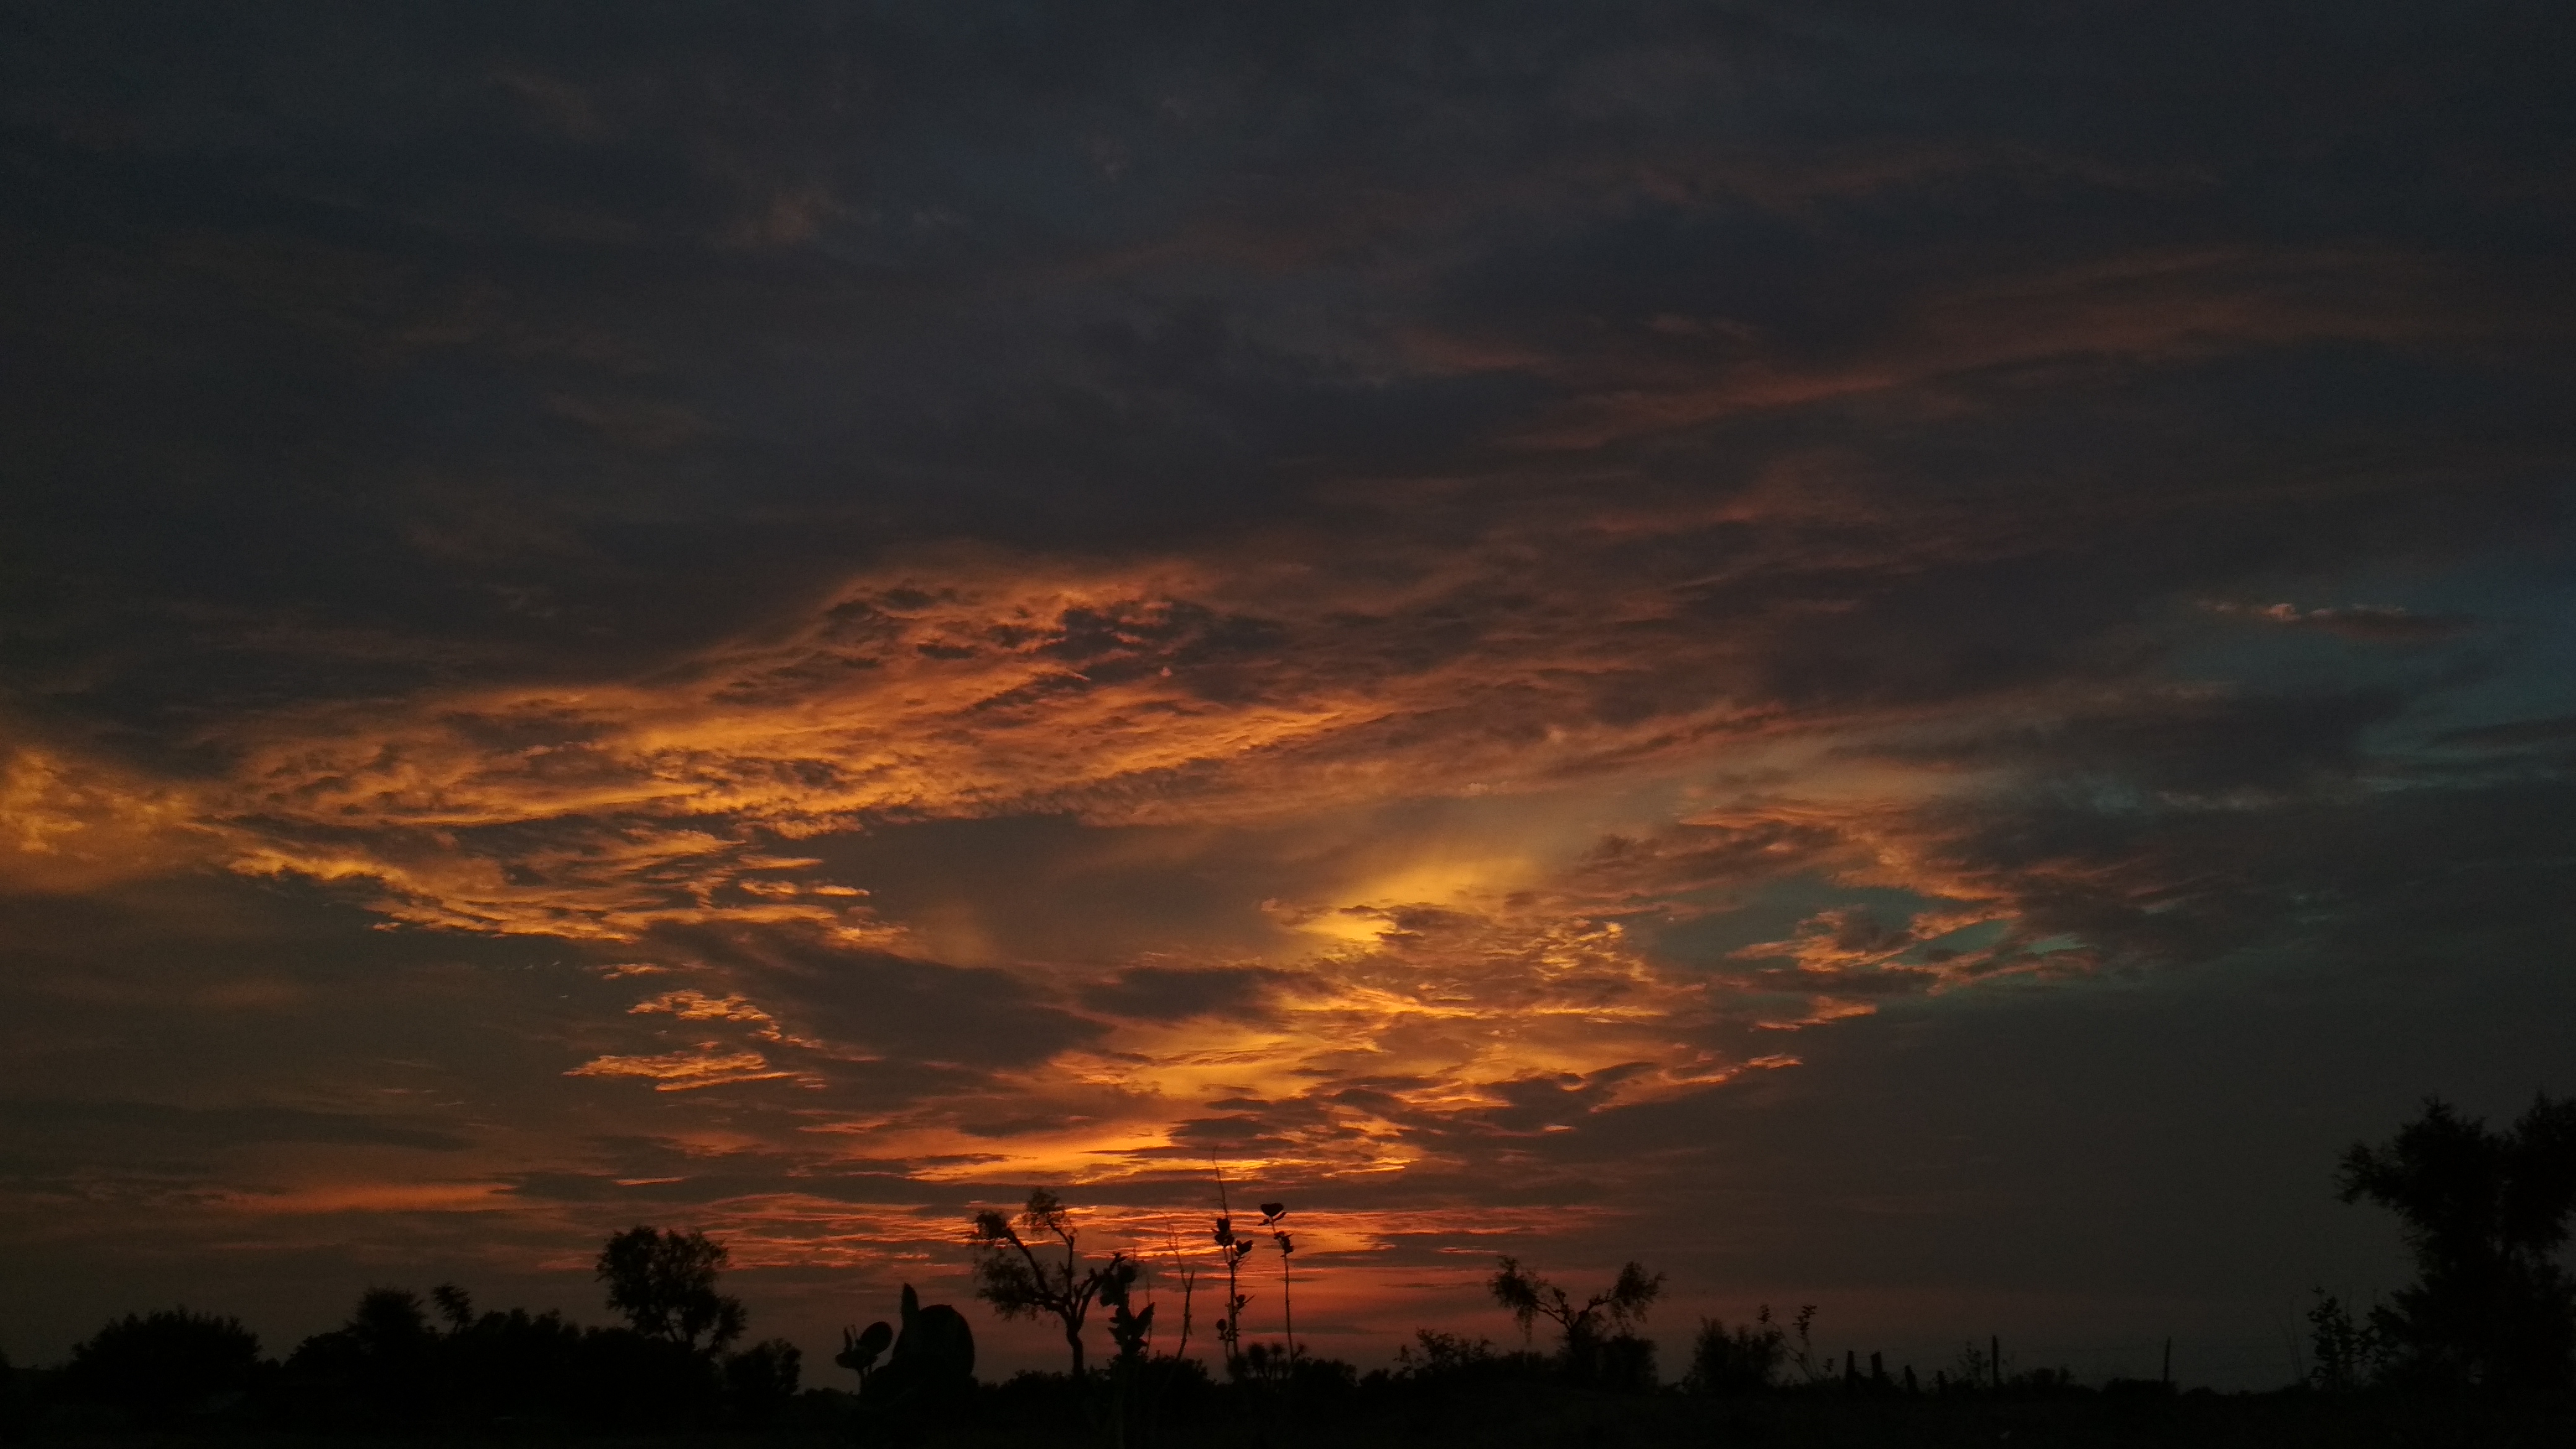 Sunset View in Rajasthan 2